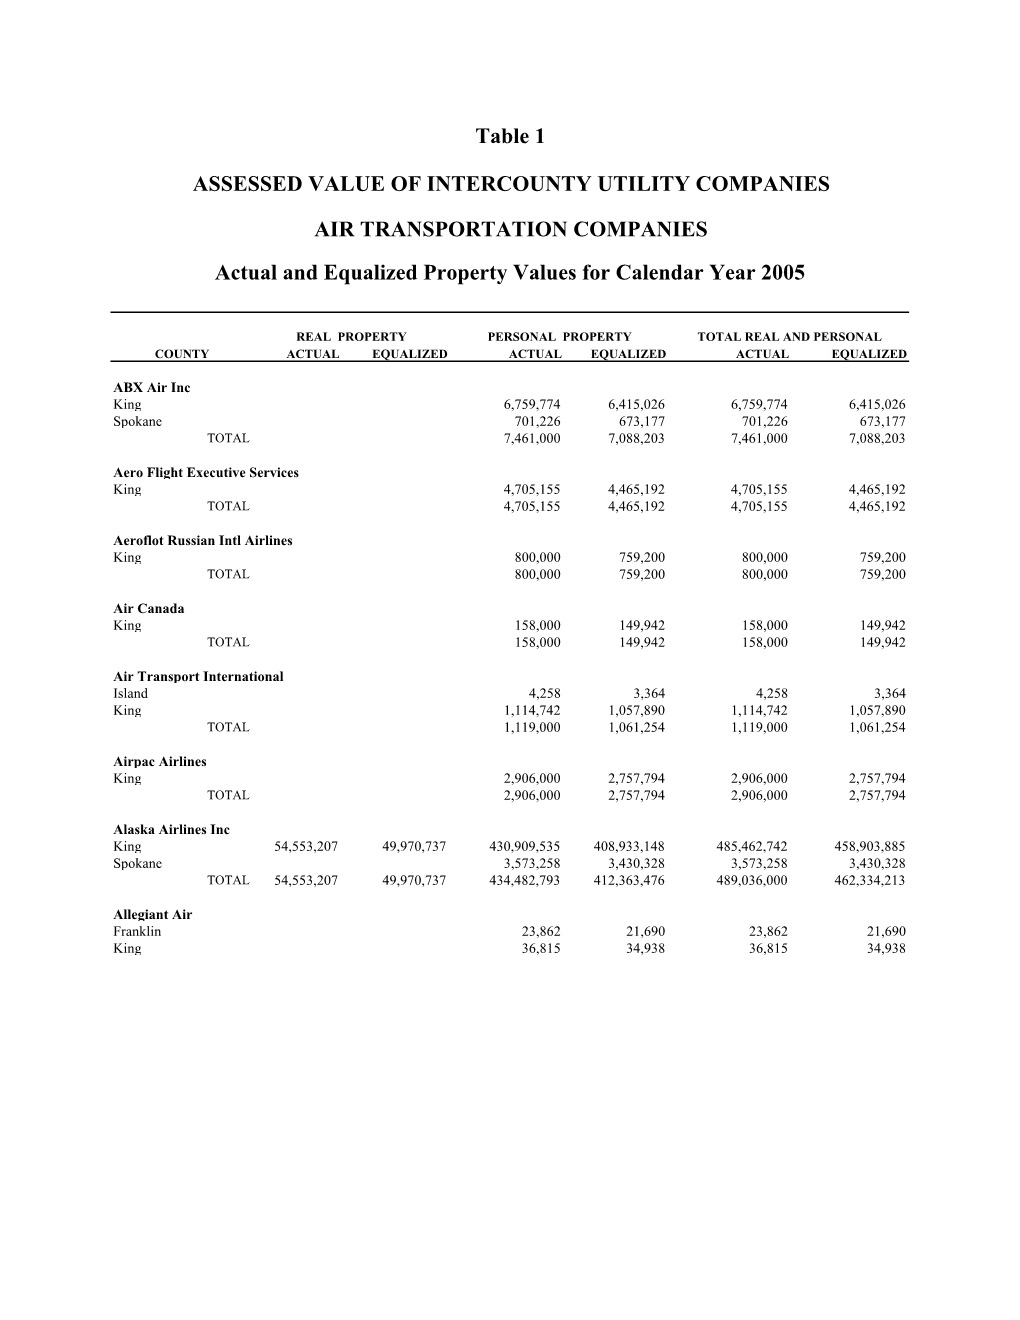 Table 1 ASSESSED VALUE of INTERCOUNTY UTILITY